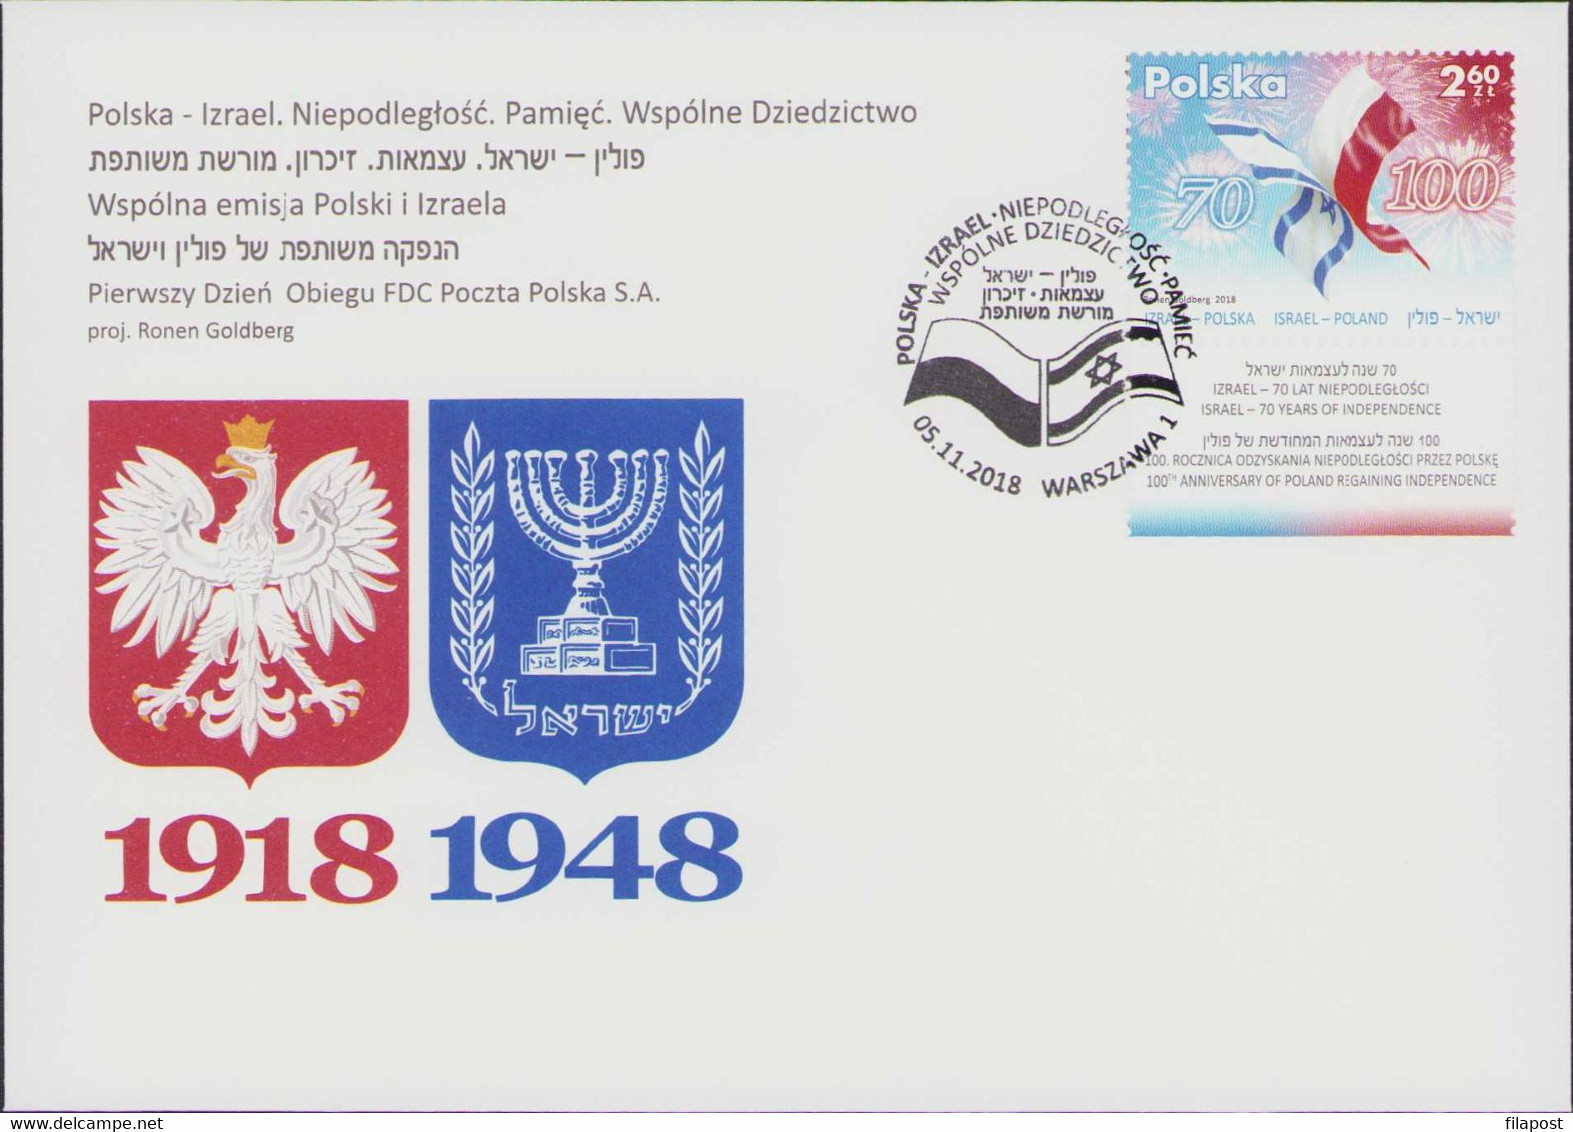 2018 Poland - Israel Joint Issue Booklet Mi 5034 Flag Independence / Memory Common Heritage, FDC + 2 Stamps MNH** FV - Markenheftchen